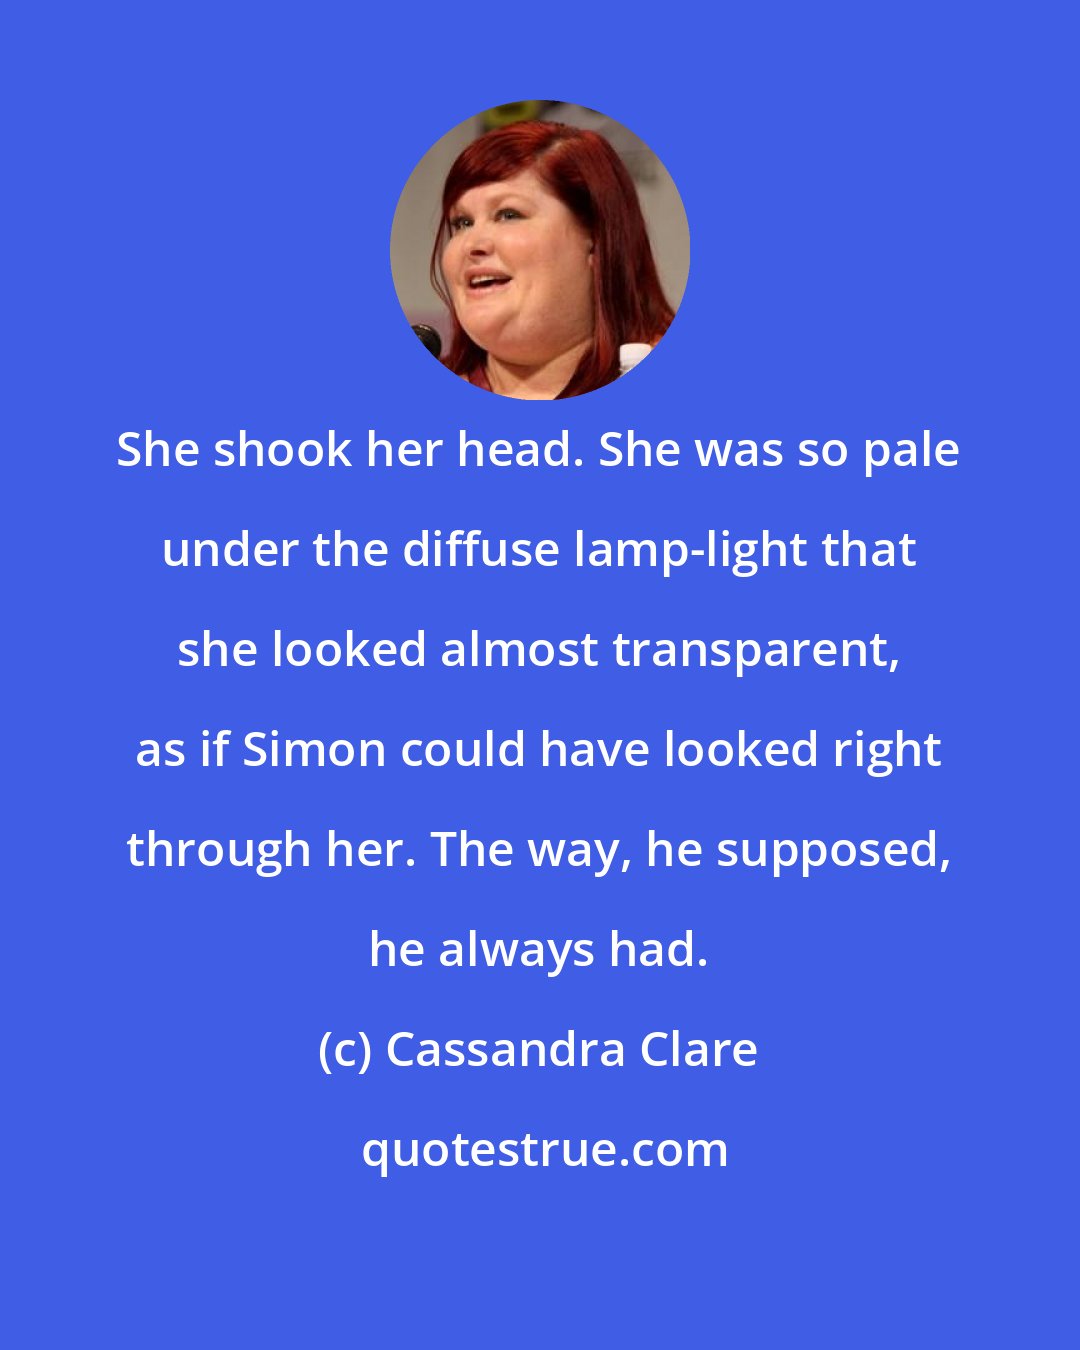 Cassandra Clare: She shook her head. She was so pale under the diffuse lamp-light that she looked almost transparent, as if Simon could have looked right through her. The way, he supposed, he always had.